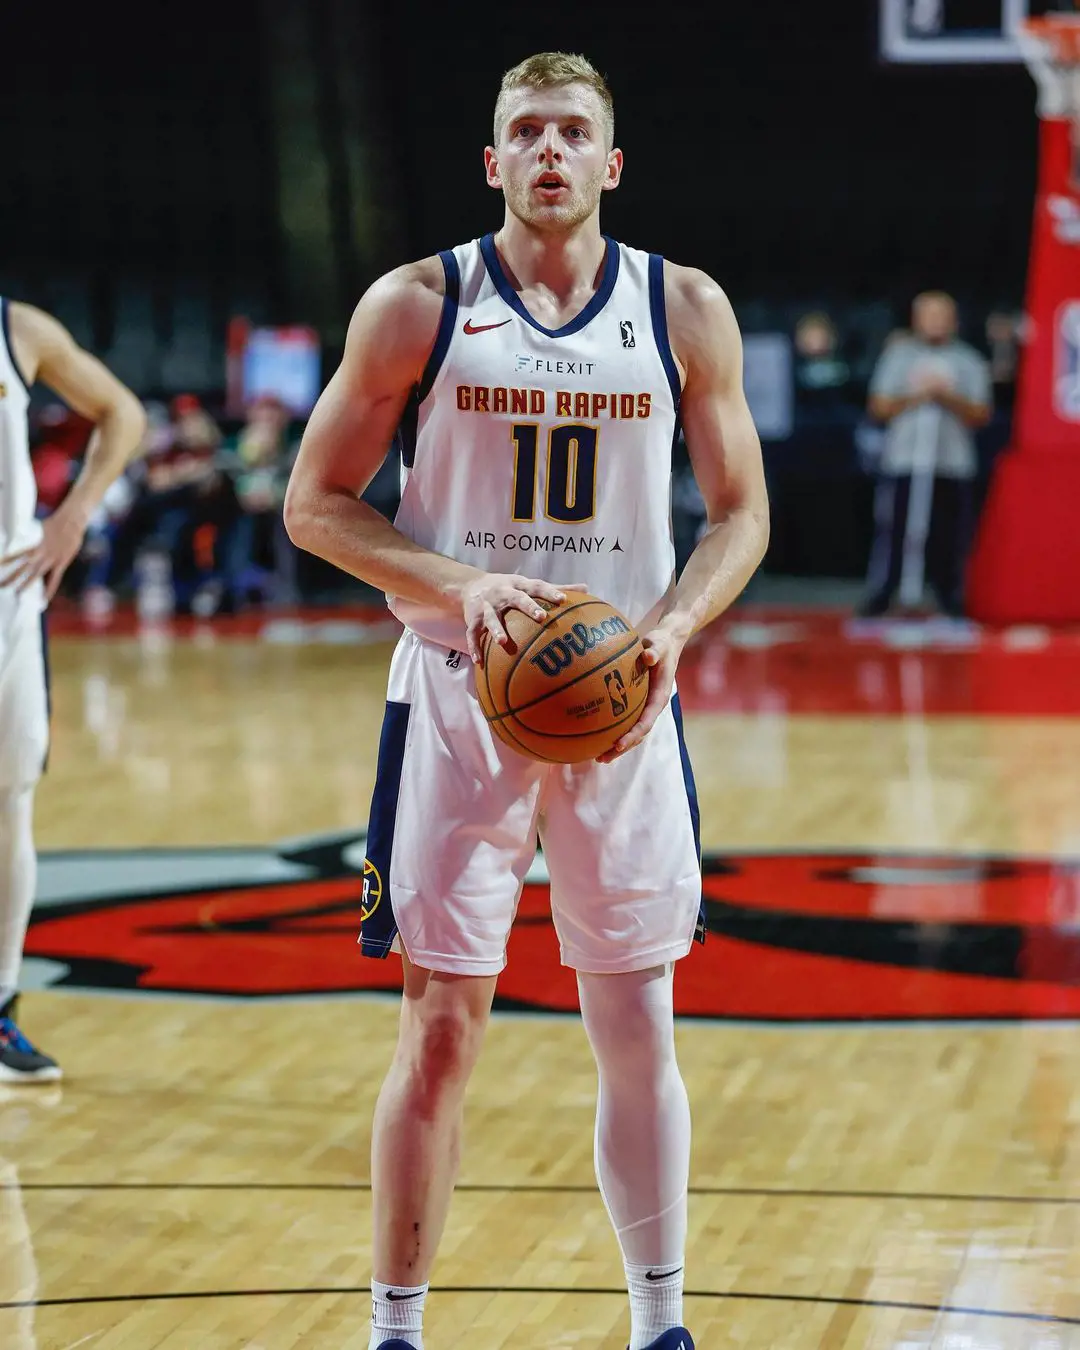 Jack has a two-way contract with the Grand Rapids Gold of the NBA G League.